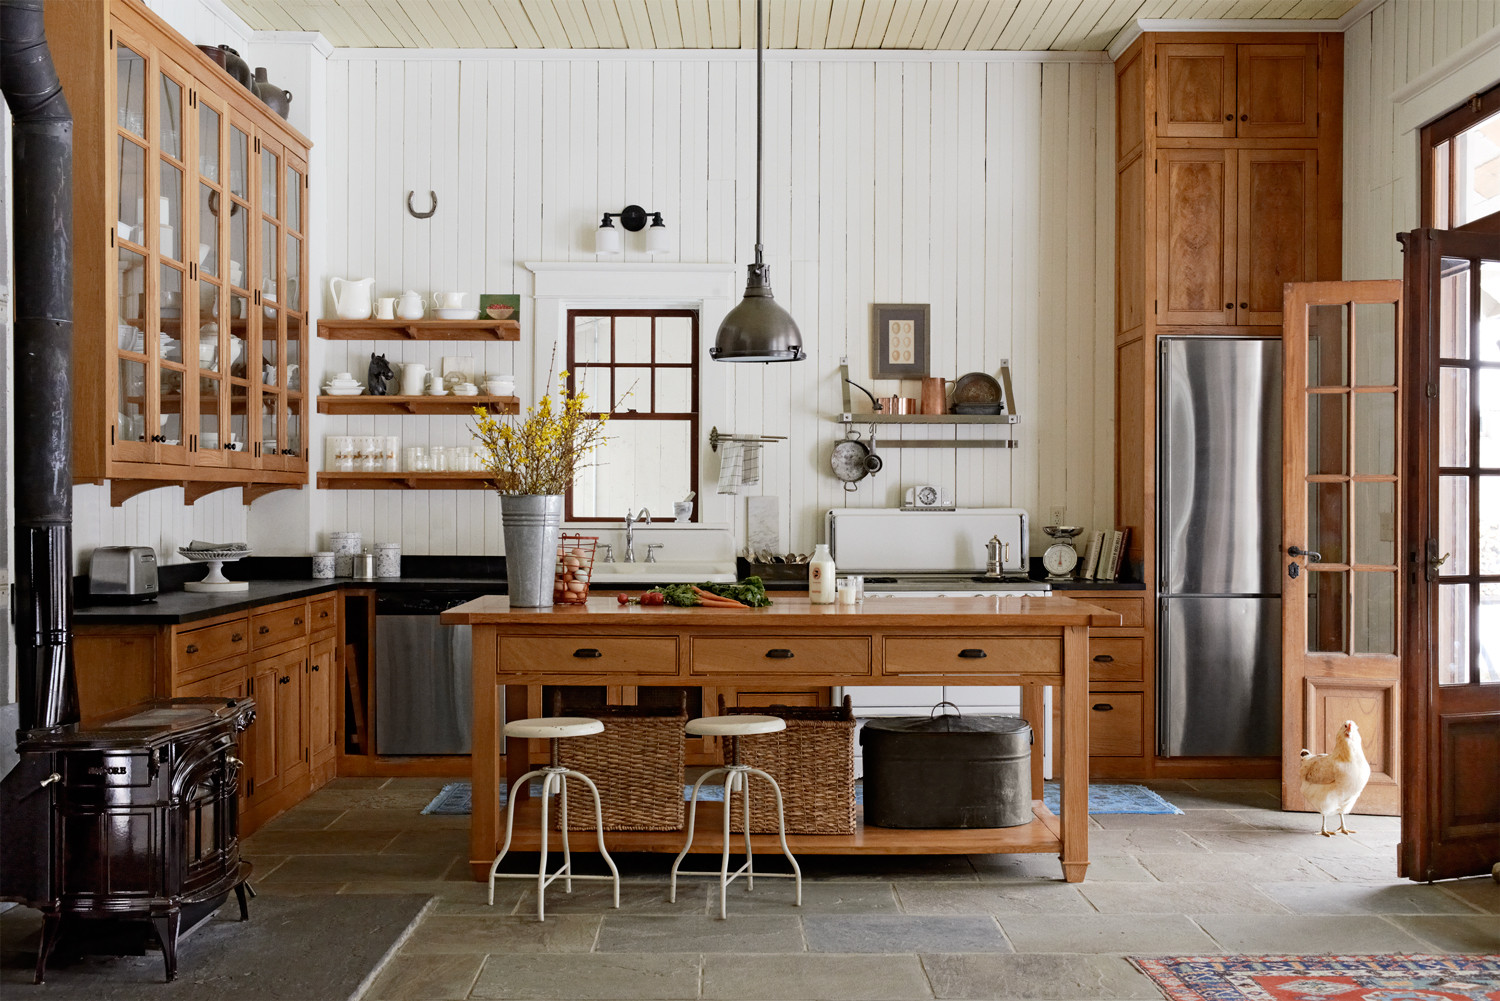 Country Kitchen Designs
 8 Ways to Add Authentic Farmhouse Style to Your Kitchen